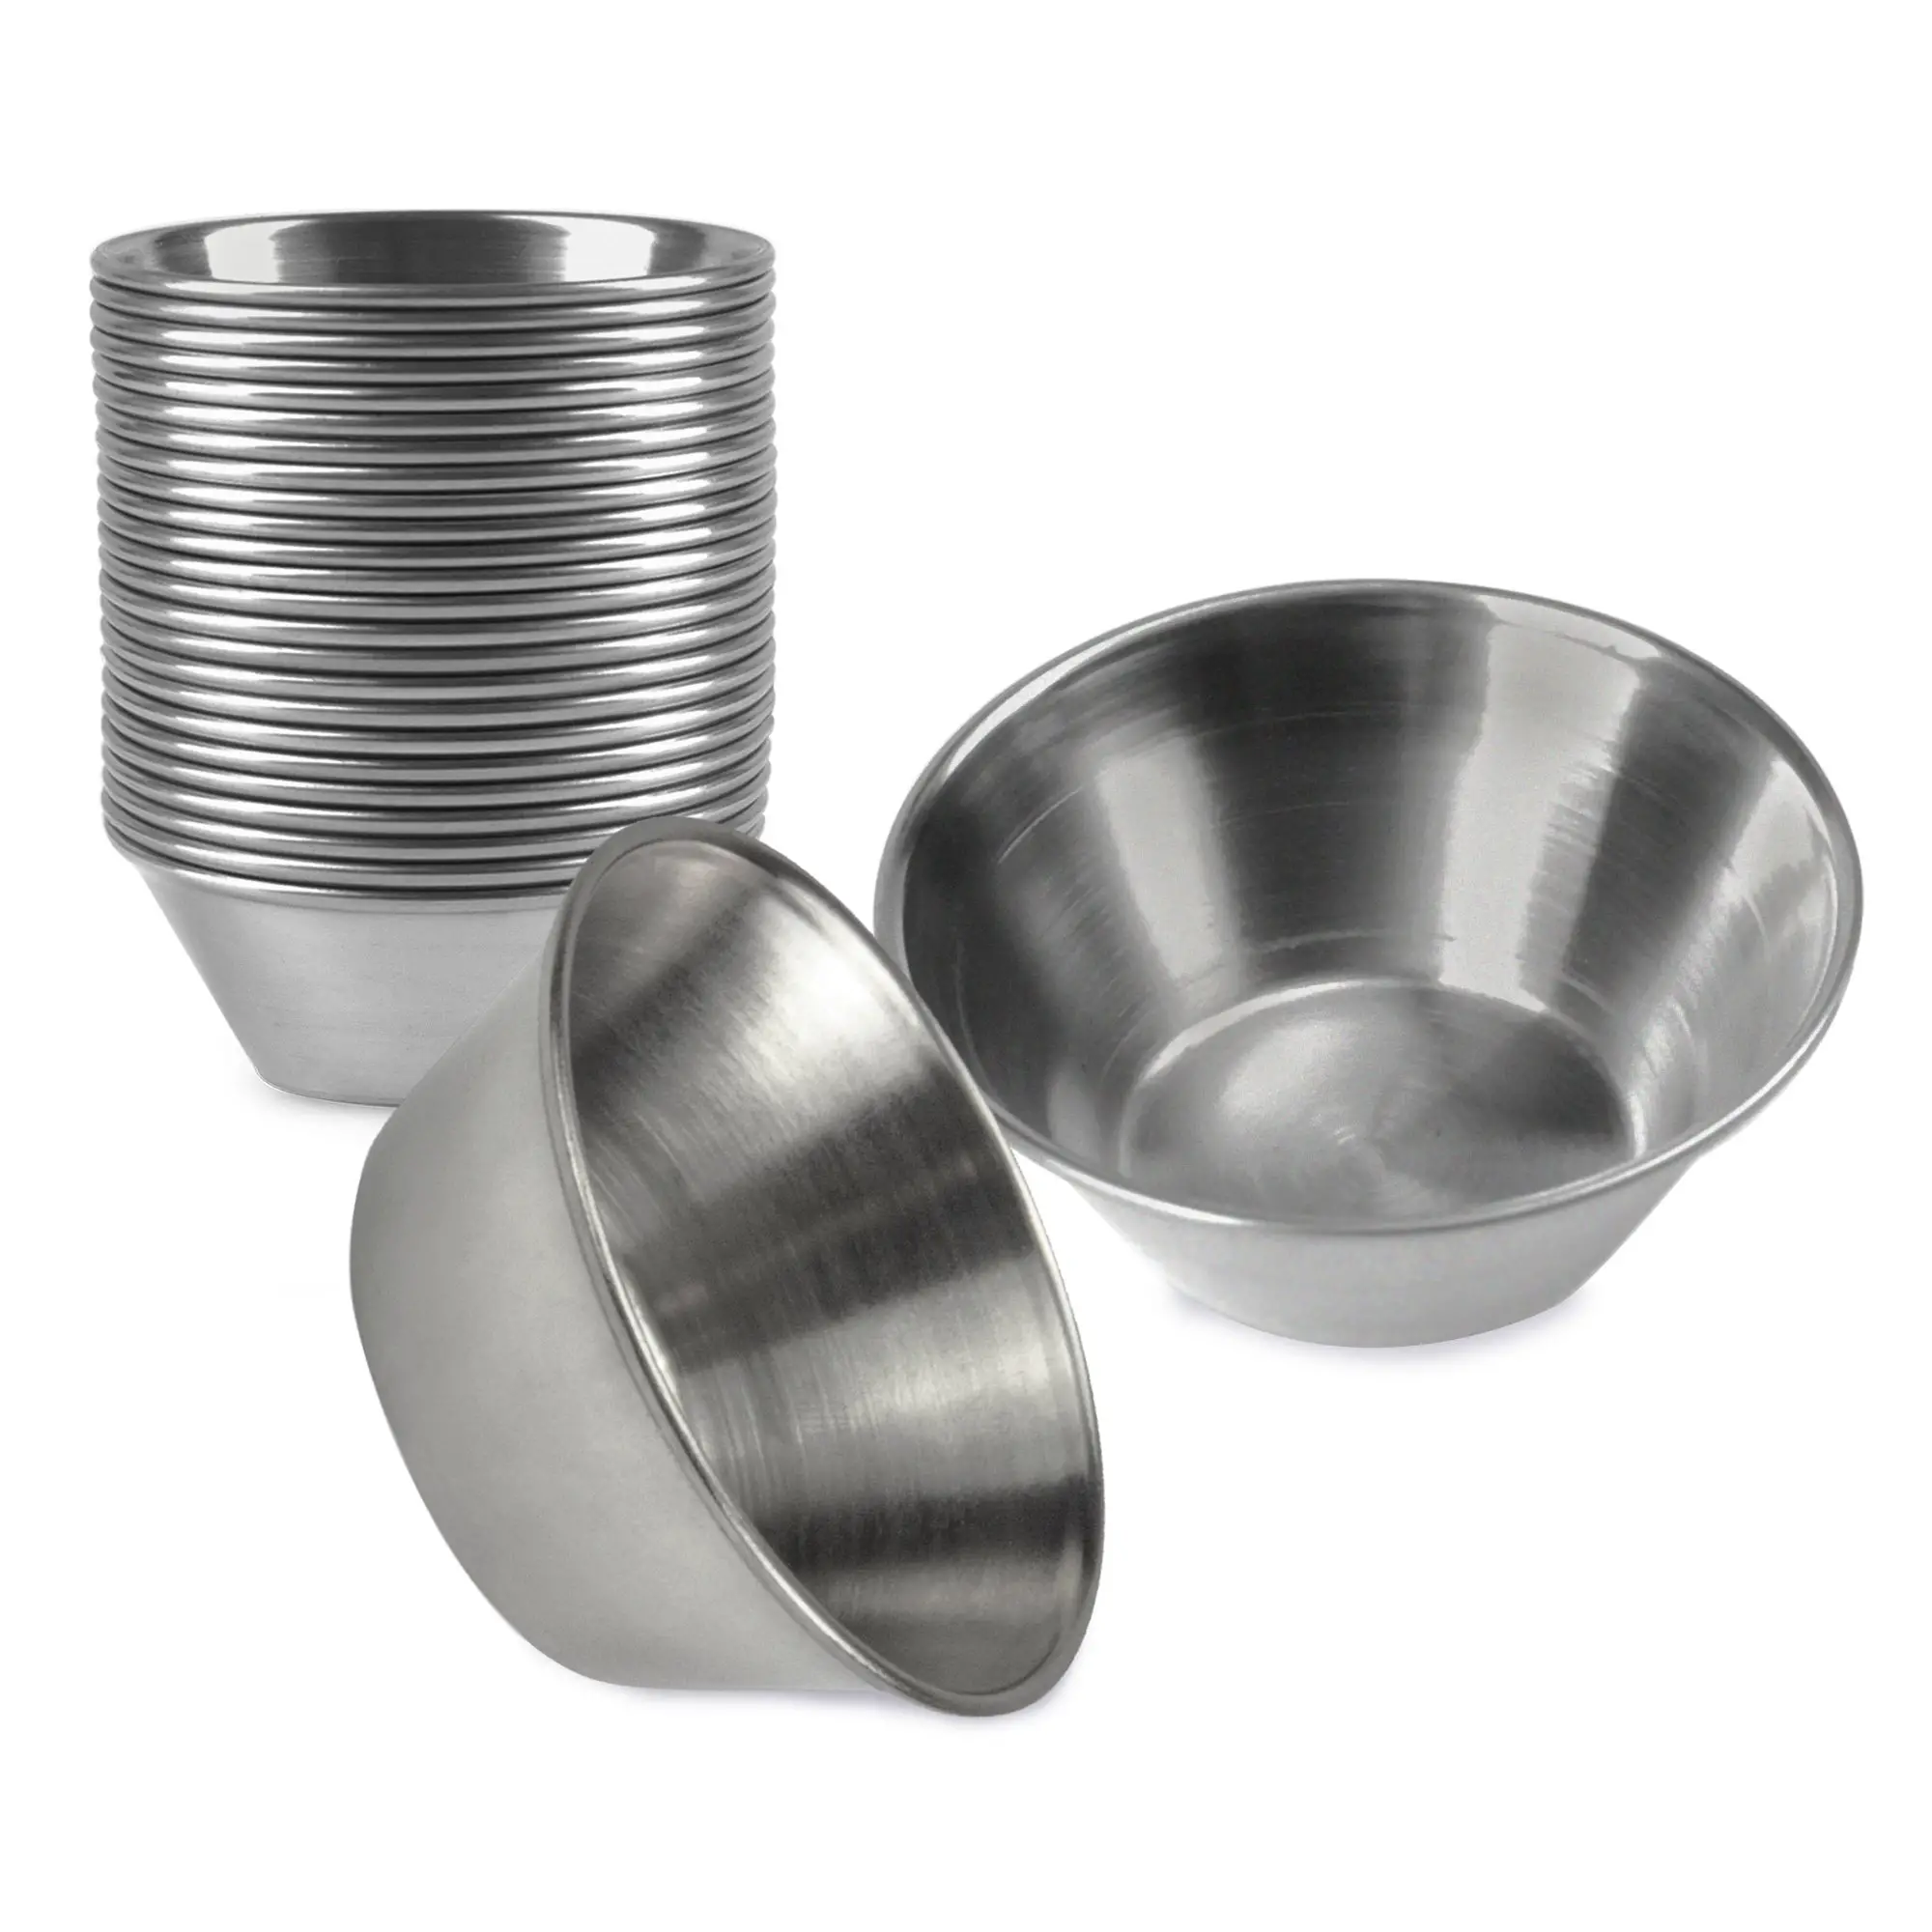 [24 Pack] 1.5 oz Stainless Steel Sauce Cups